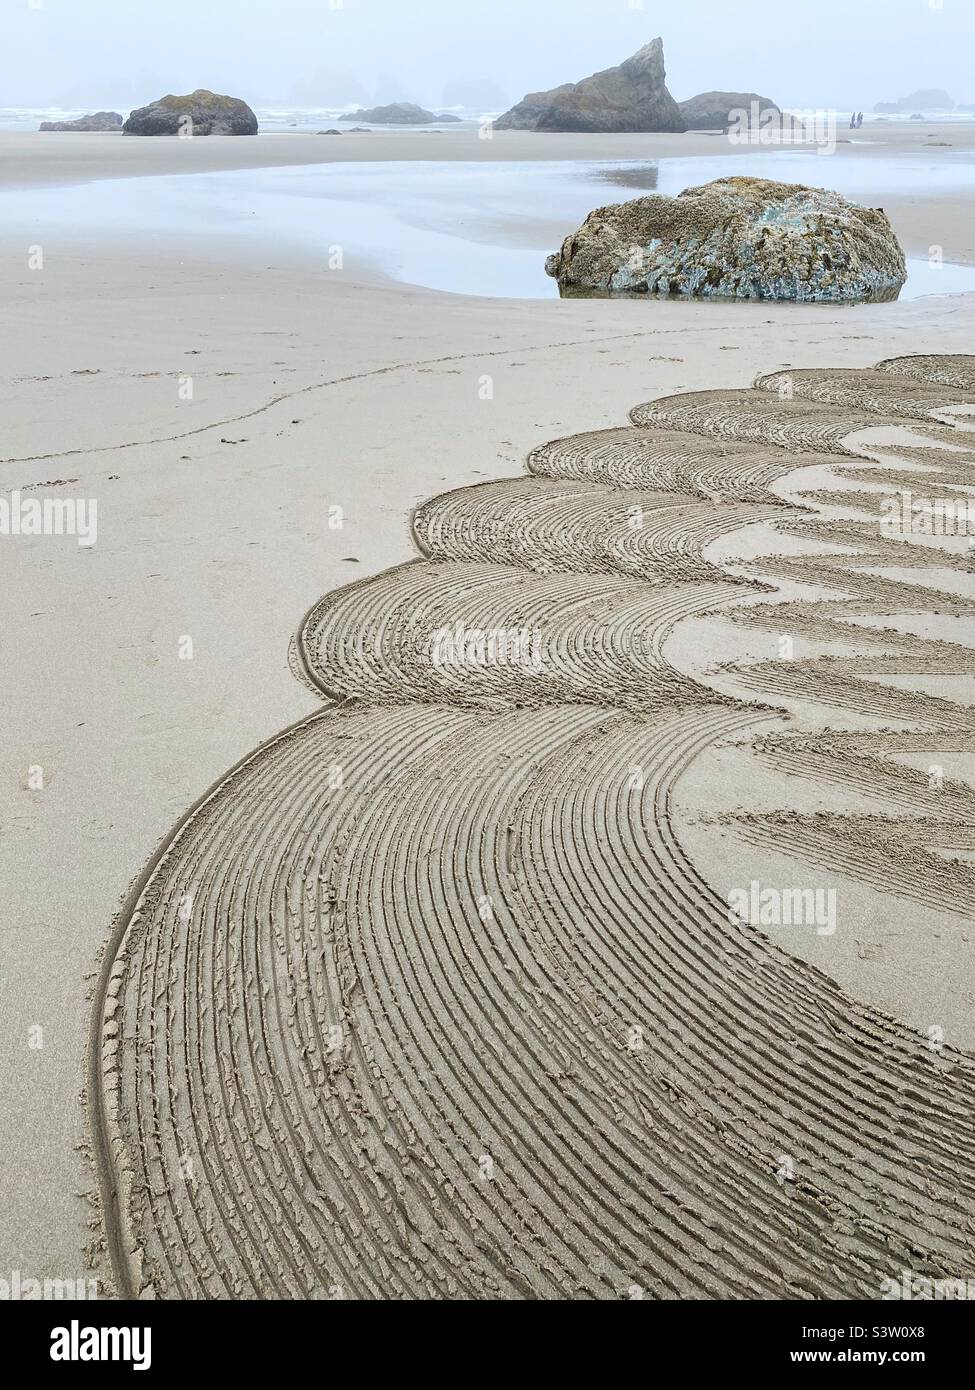 A section of a sand labyrinth on face rock beach in Bandon, oregon. Stock Photo